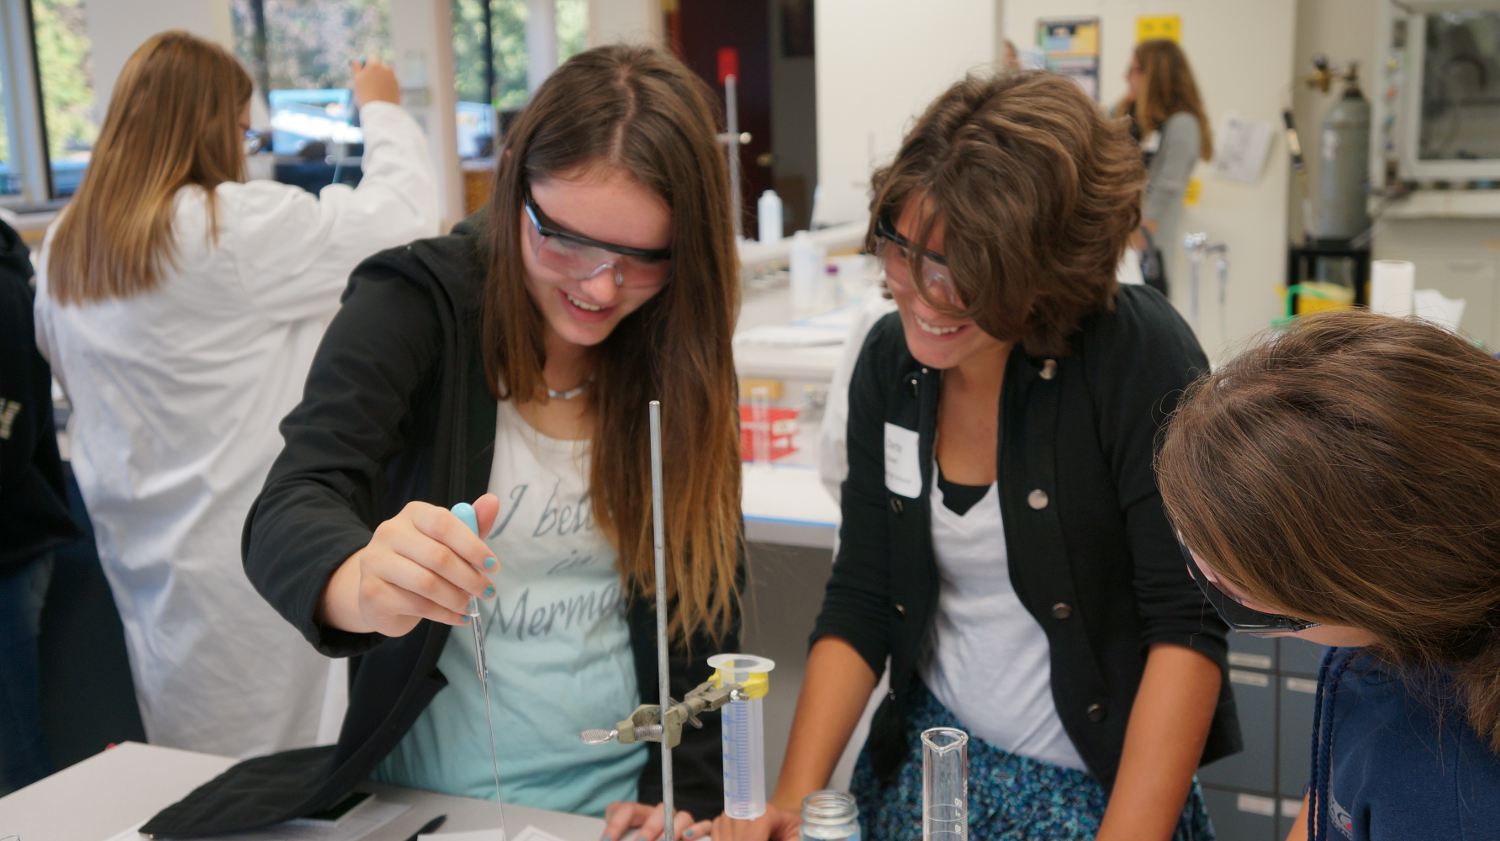 Young women running science experiments in a lab setting.